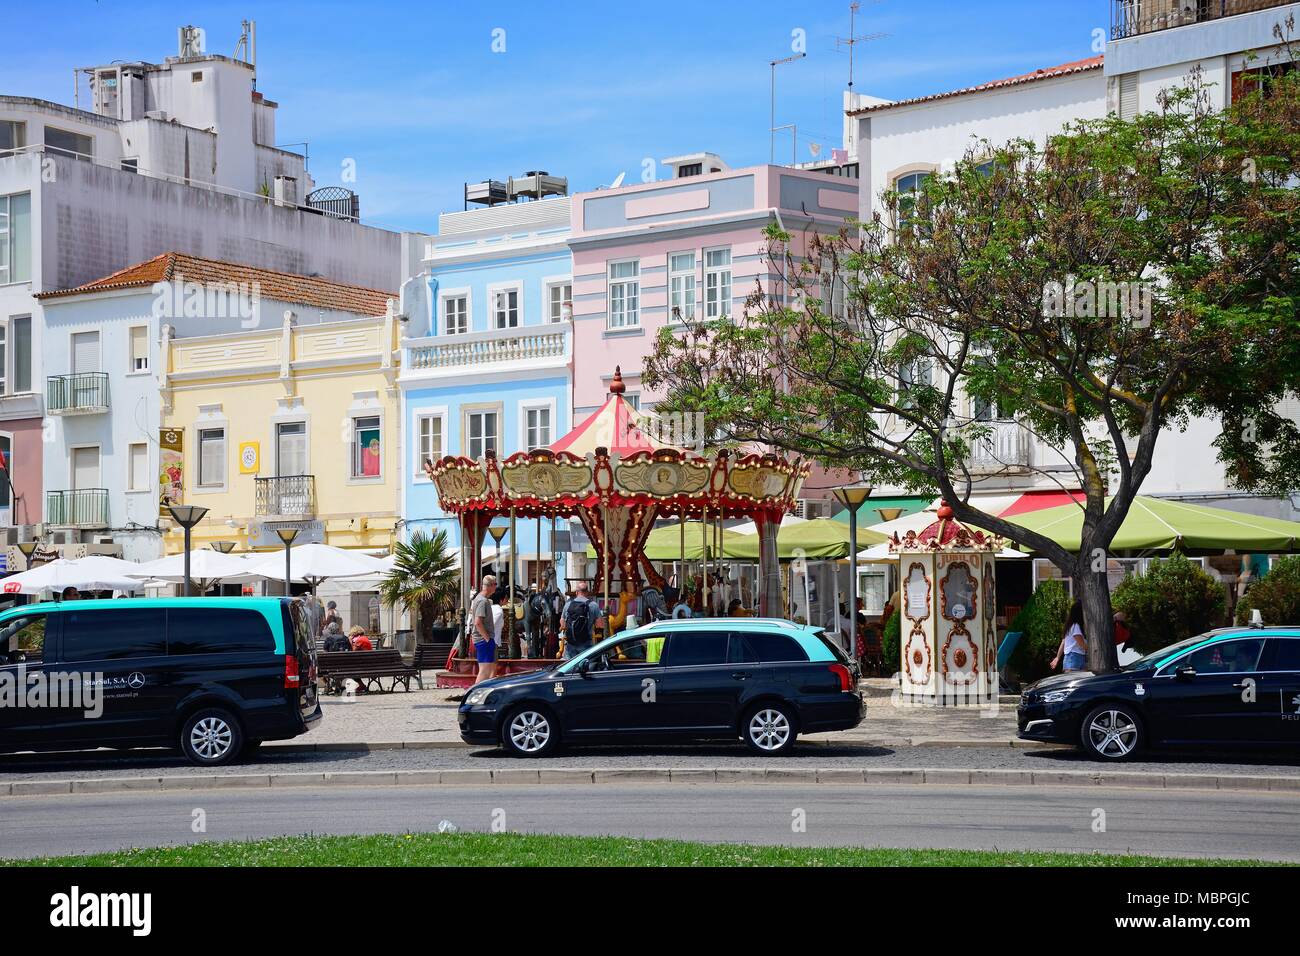 Animal carousel fairground ride along the Rua Porta de Portugal with taxi cabs in the foreground, Lagos, Algarve, Portugal, Europe. Stock Photo